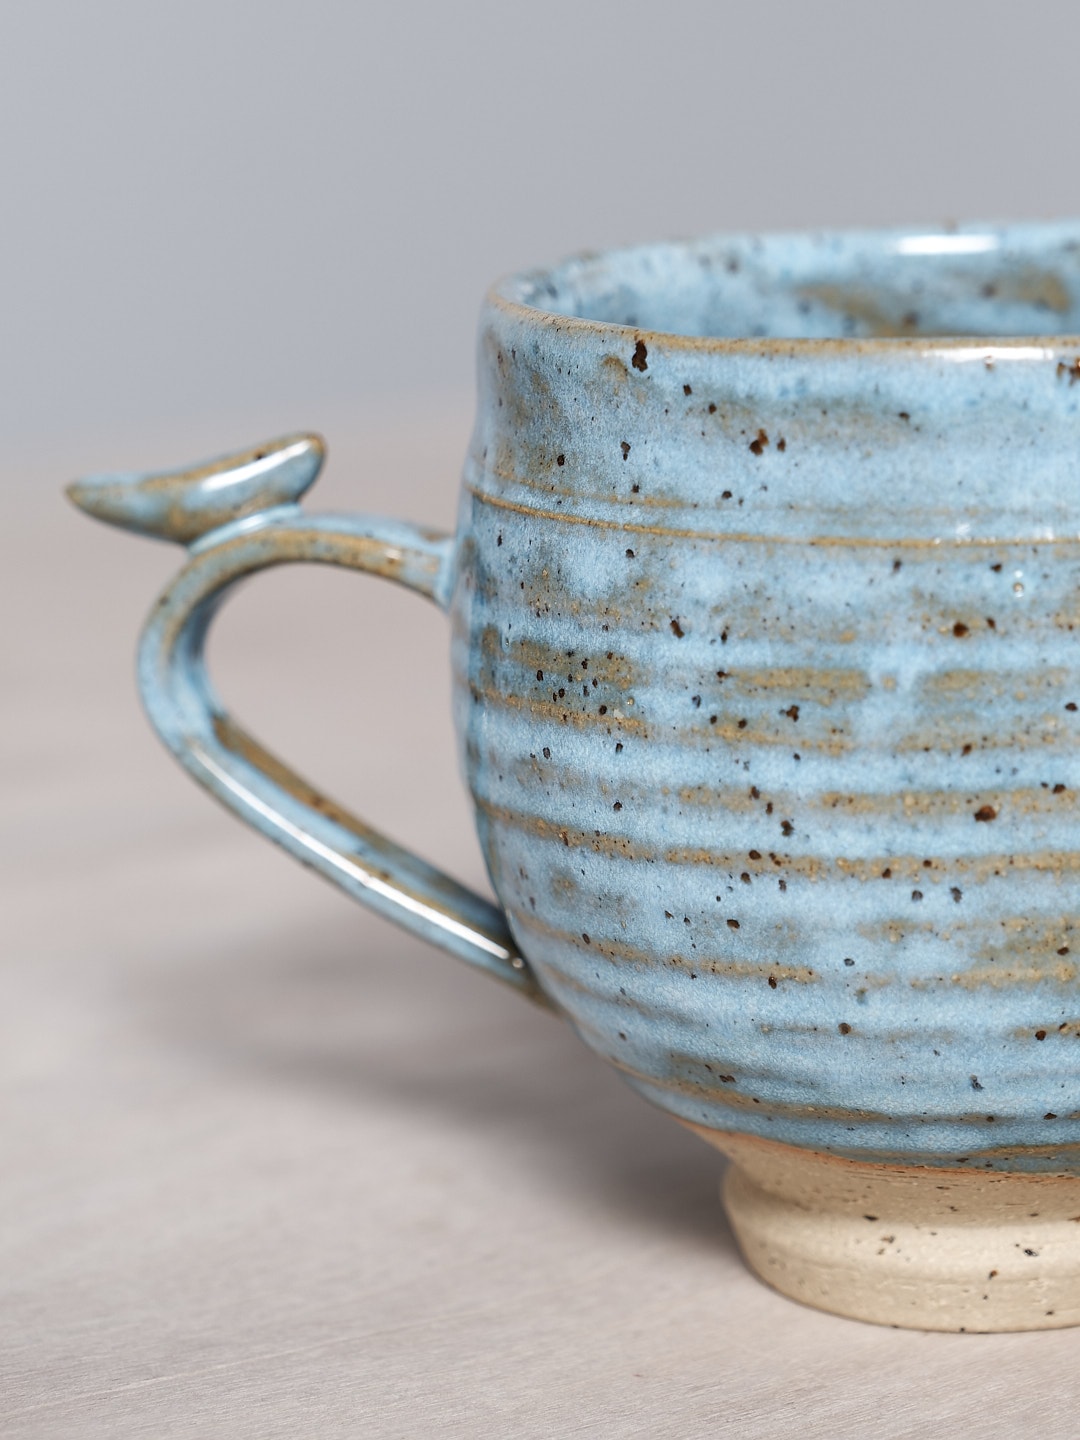 A handcrafted Bird Handle Cup - Sky Blue, by Jino Ceramic Studio, placed on a wooden table.